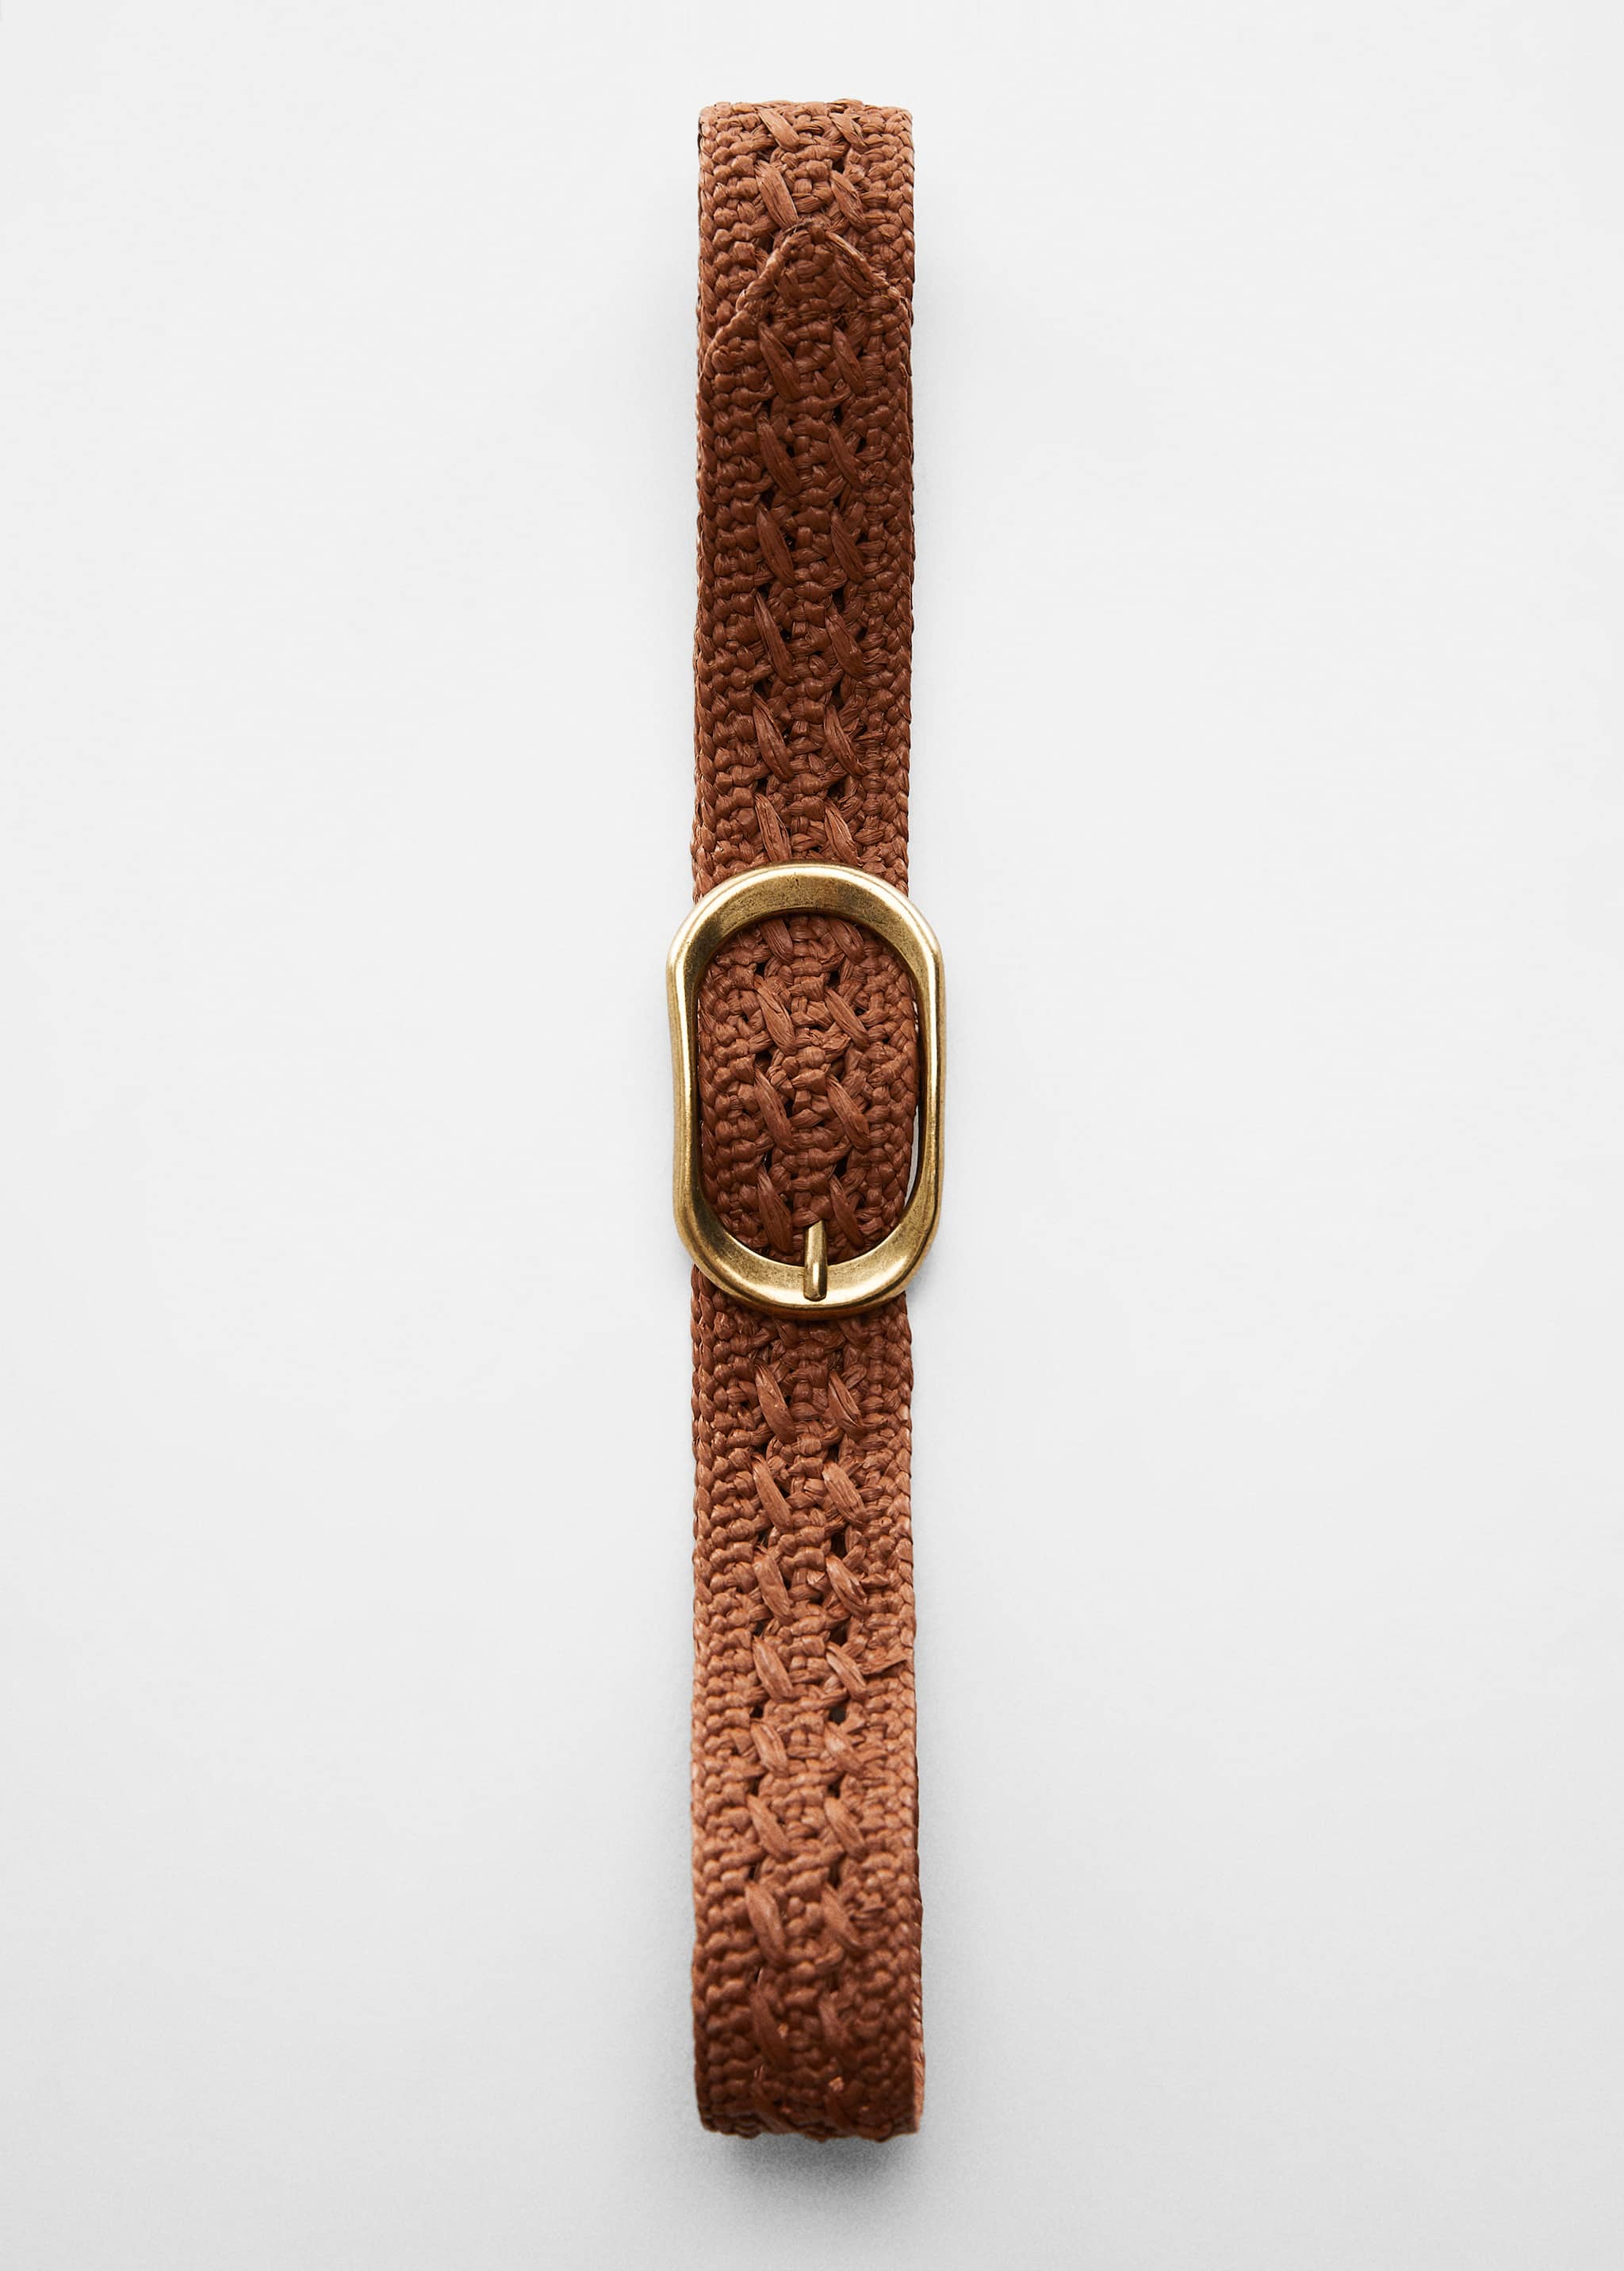 Crochet belt with buckle - Details of the article 5